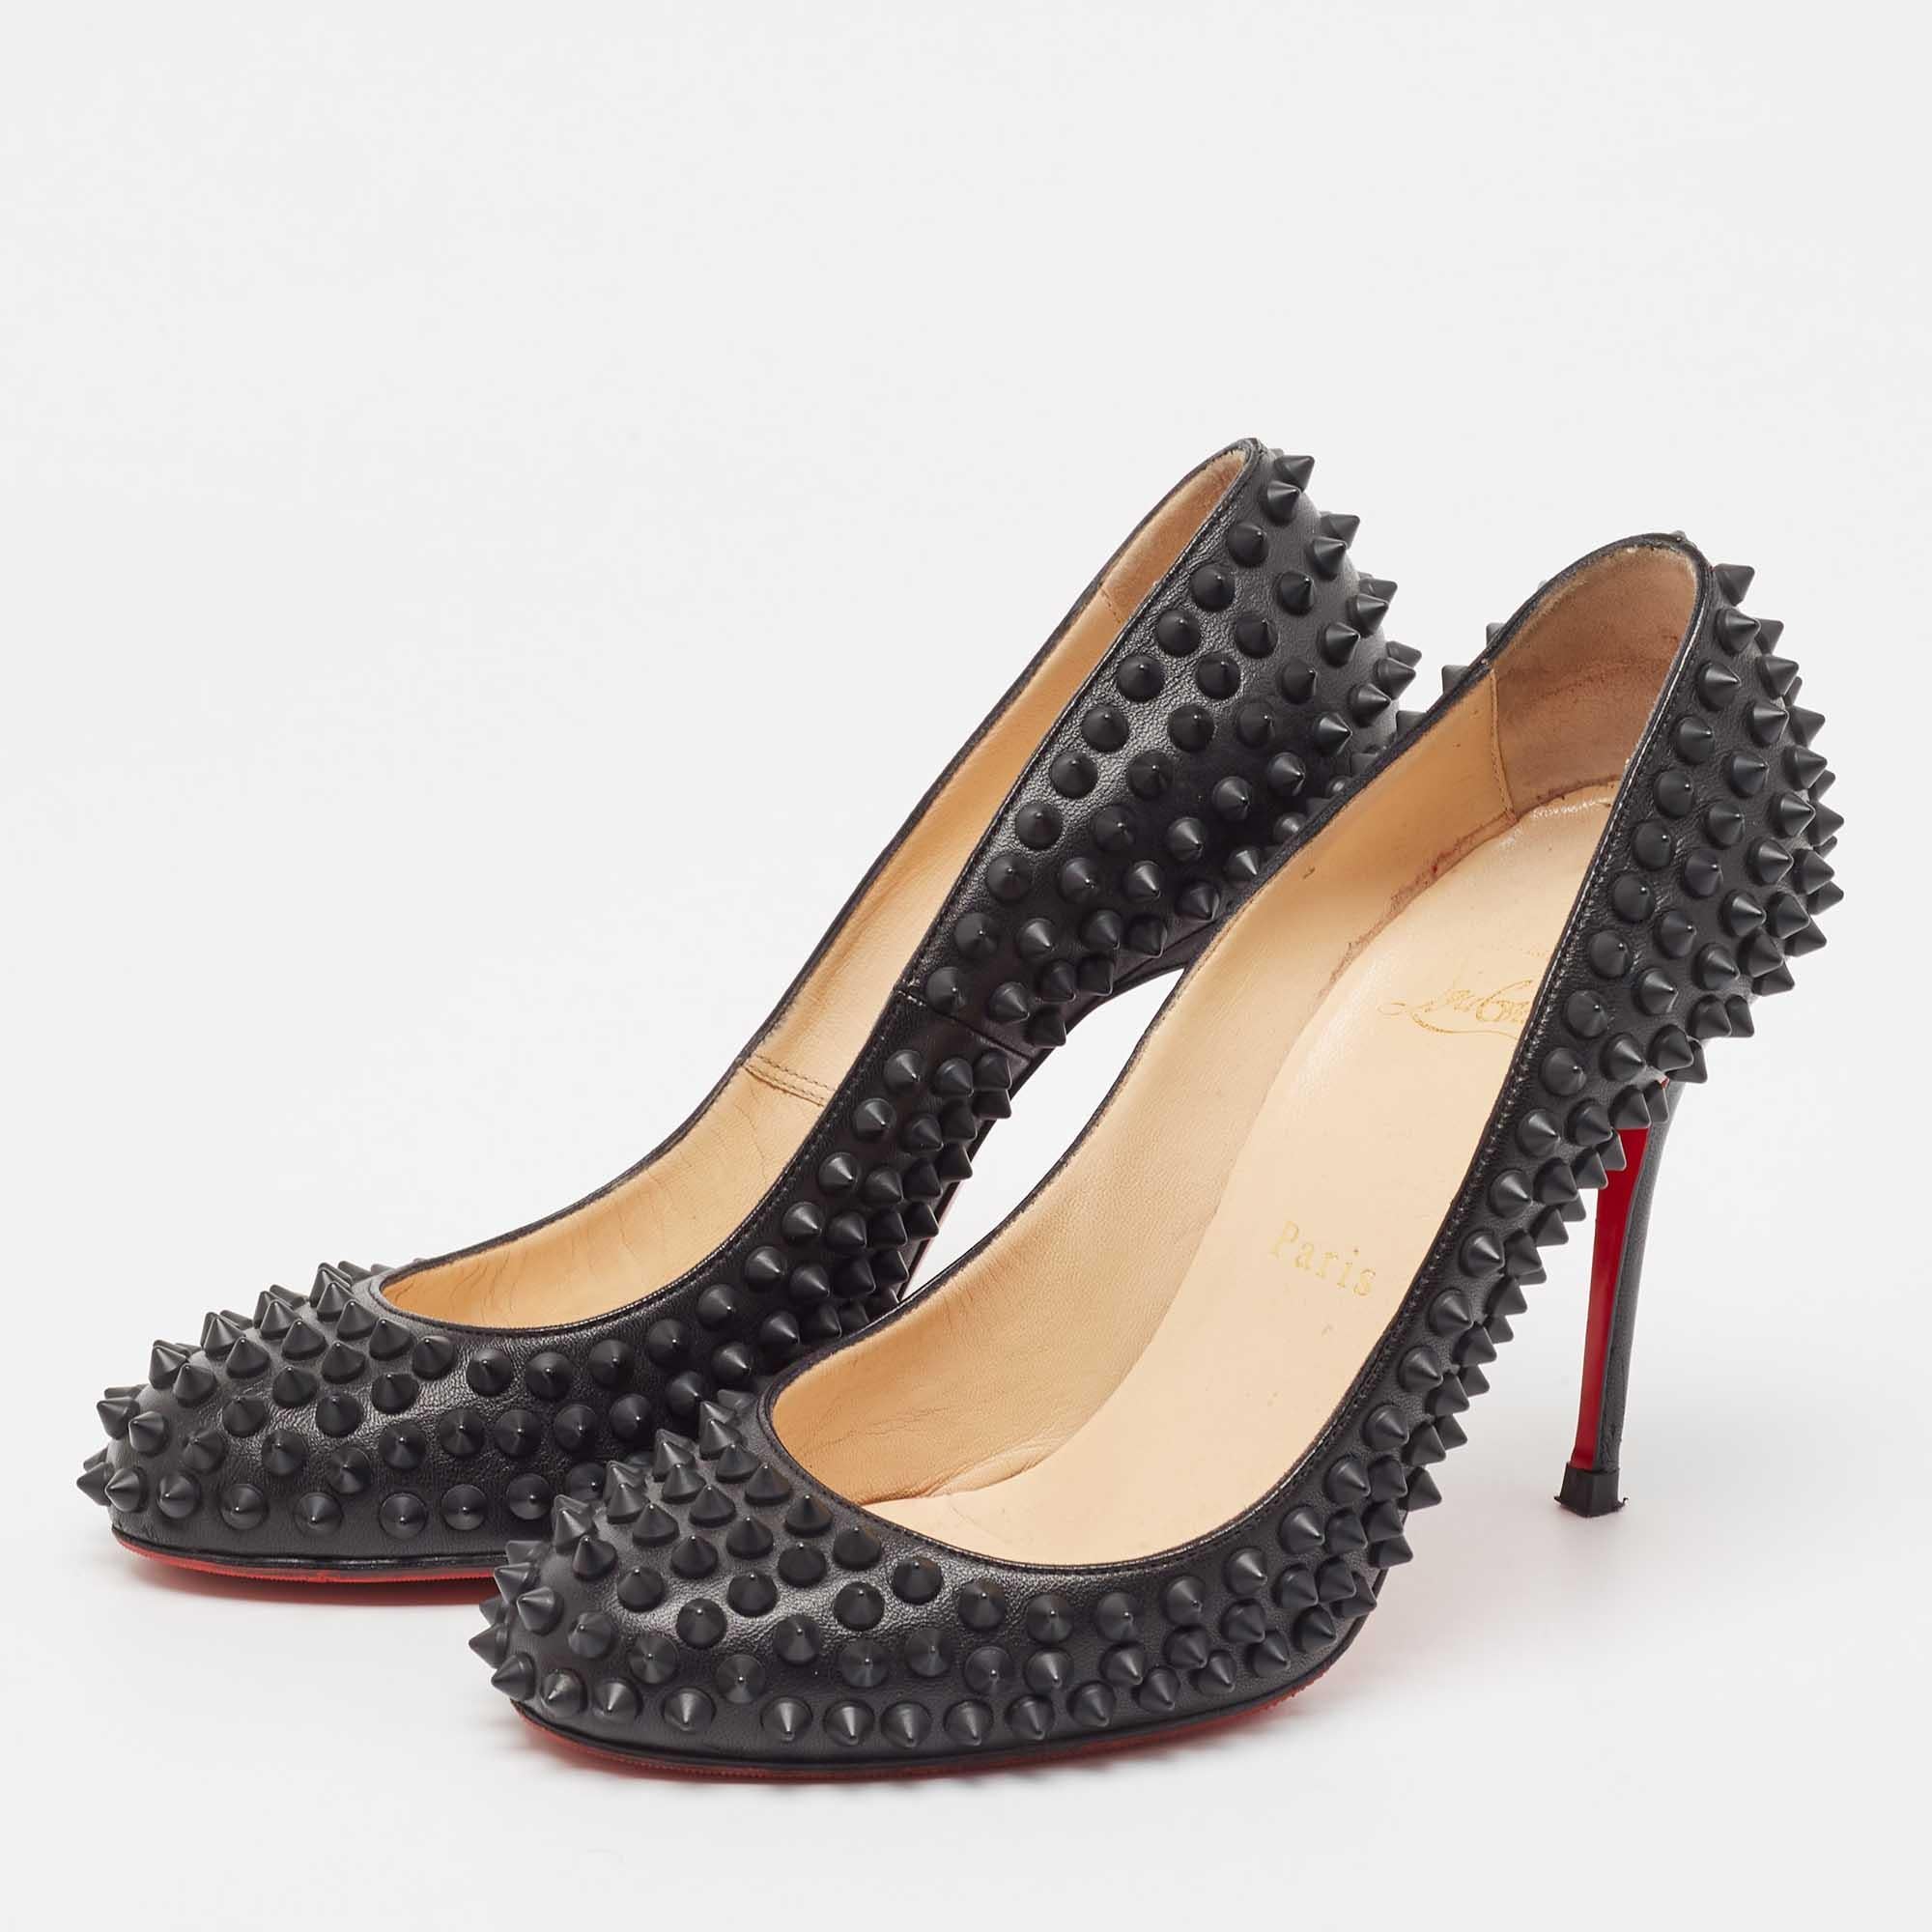 Christian Louboutin Black Leather Fifi Spikes Pumps Size 36.5 For Sale 4